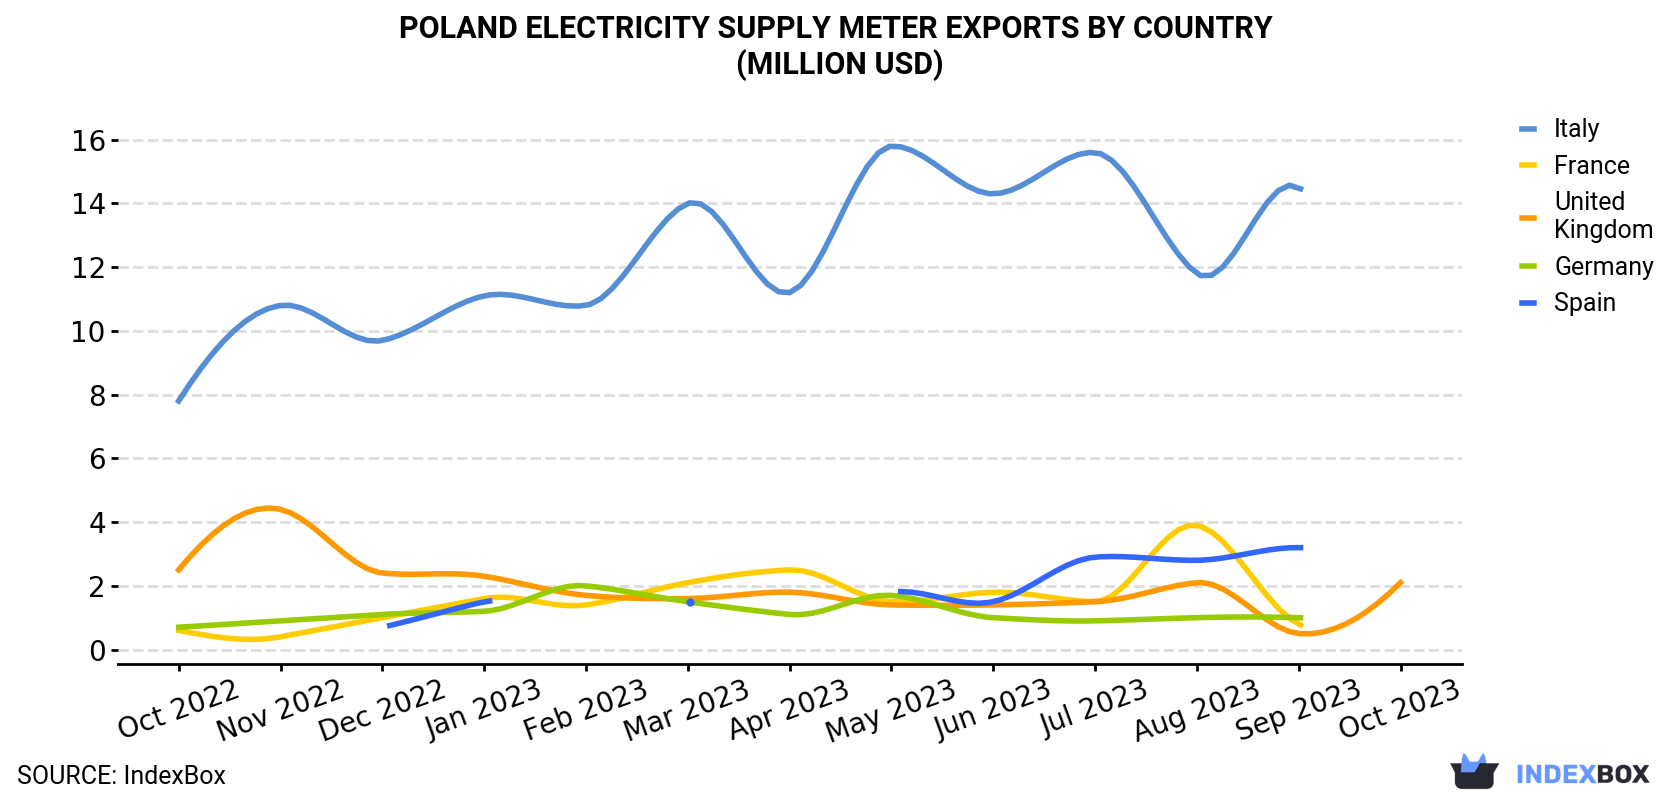 Poland Electricity Supply Meter Exports By Country (Million USD)